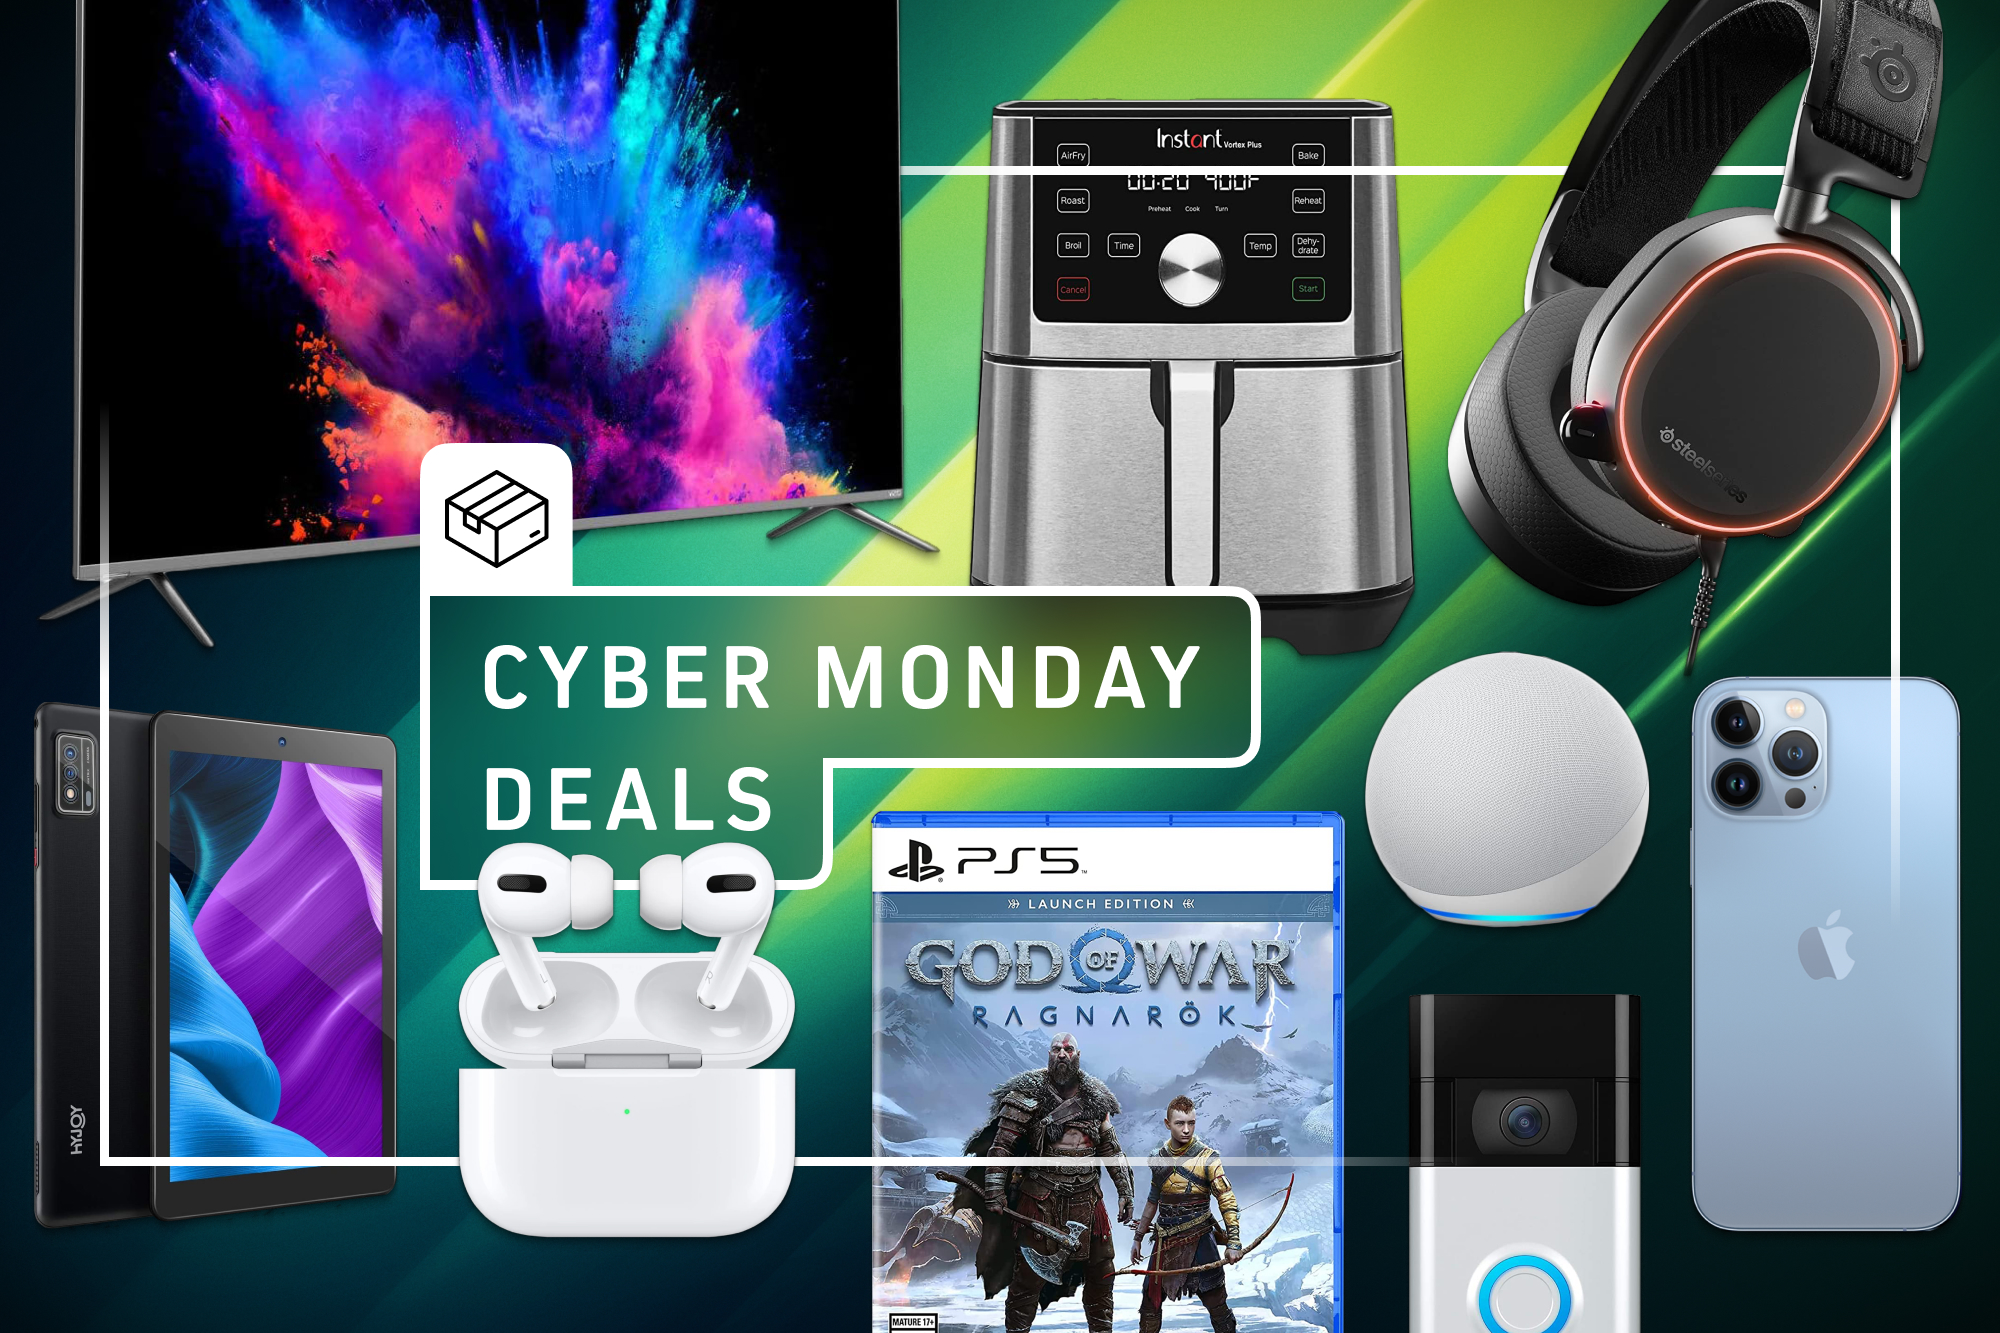 Don’t wait until tomorrow to shop these 5 Cyber Monday
deals